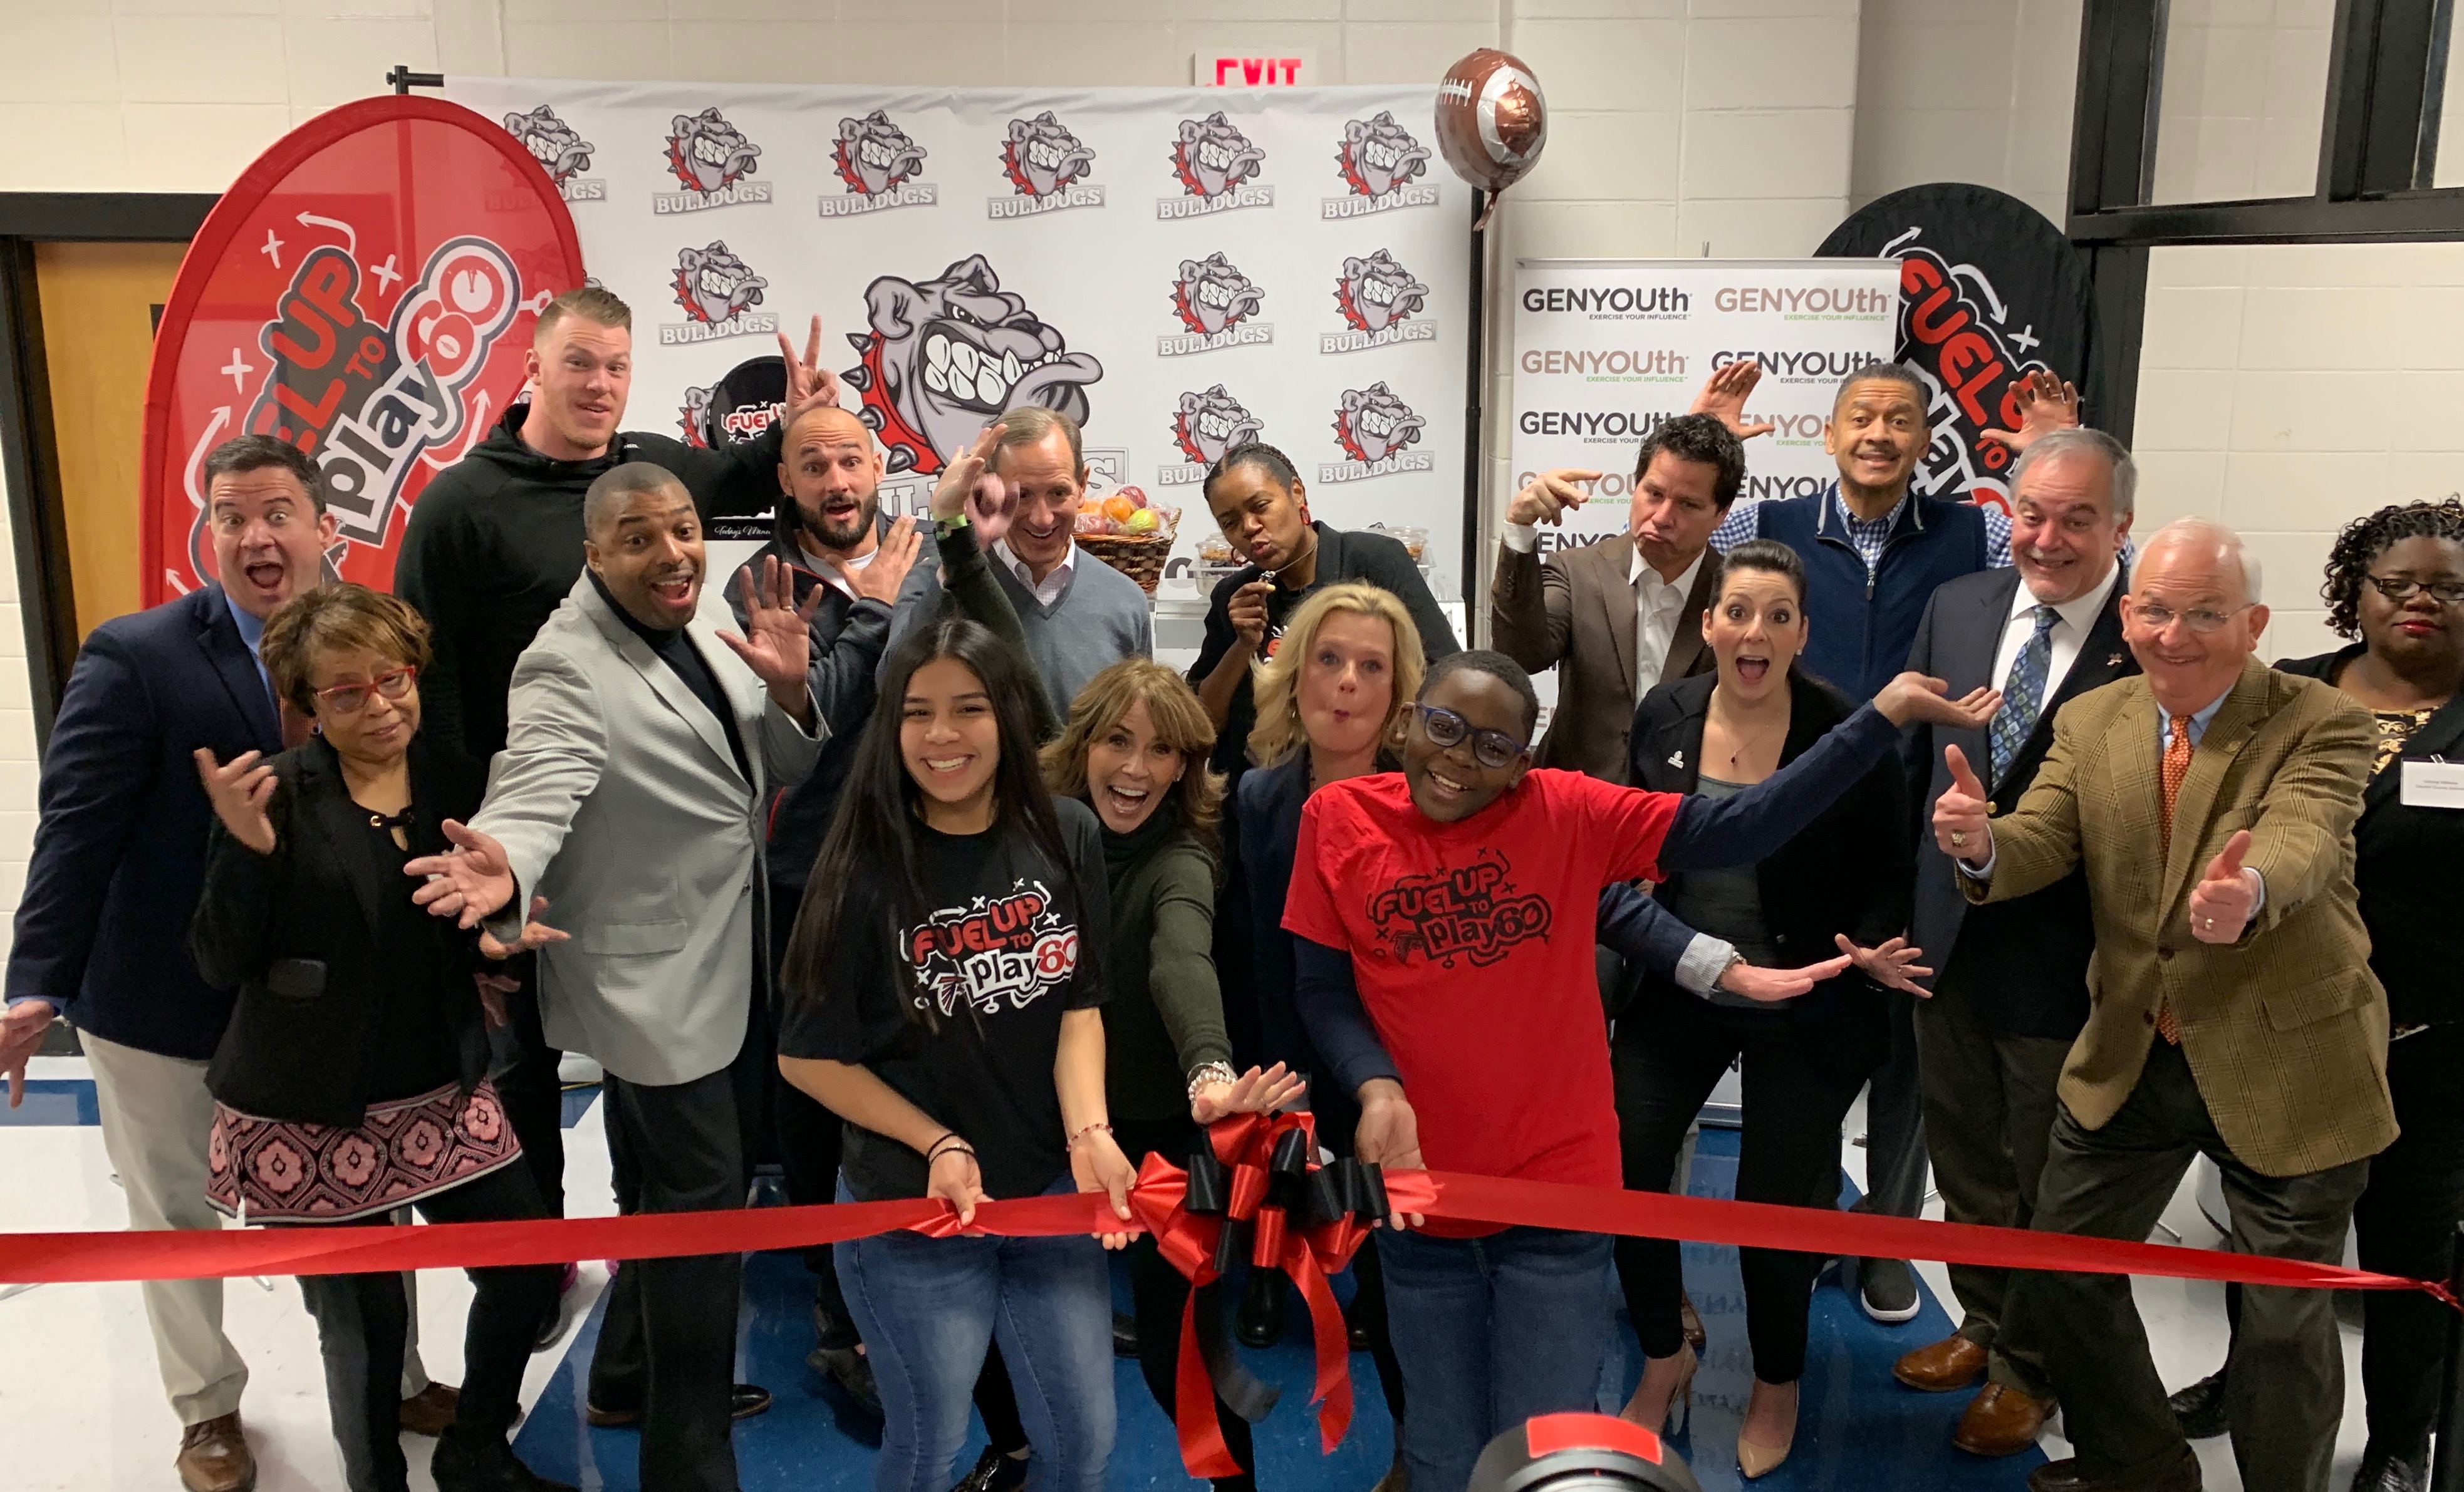 Alexis Glick, CEO, GENYOUth joins business and community leaders at a school in Atlanta to launch the first of 53 Fuel Up to Play 60 Grab-n-go breakfast carts. 